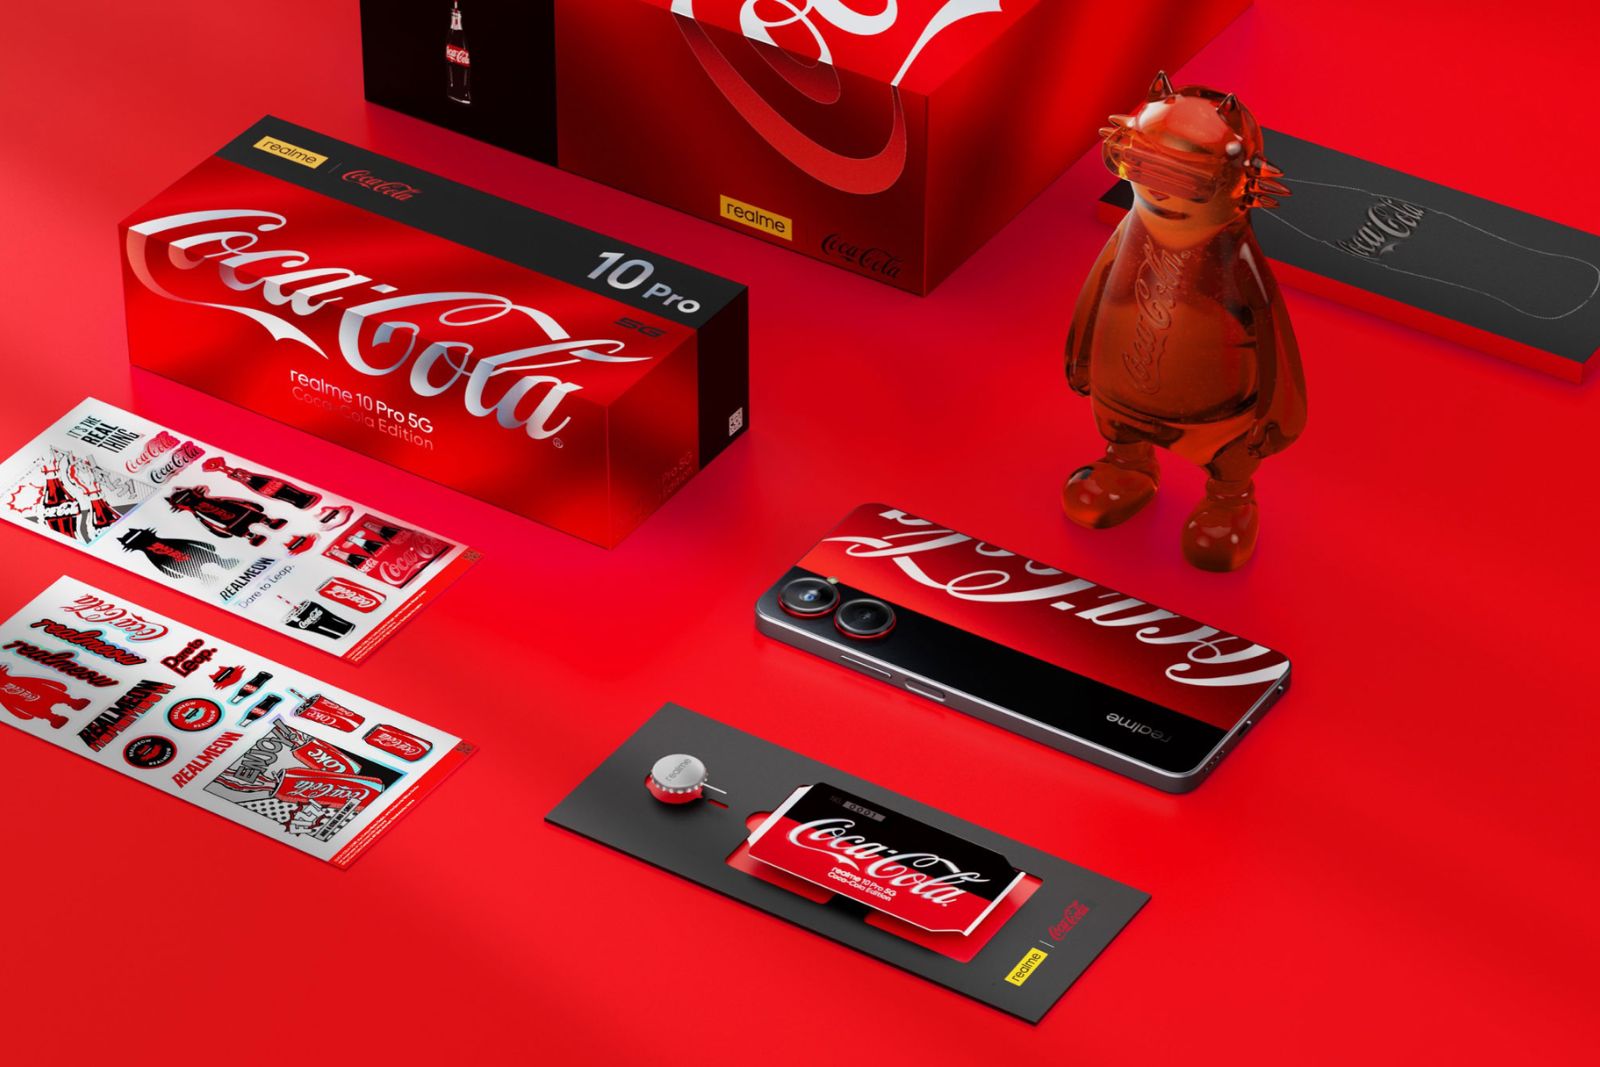 Realme 10 Pro 5G Coca-Cola Edition launched with eye grabbler design